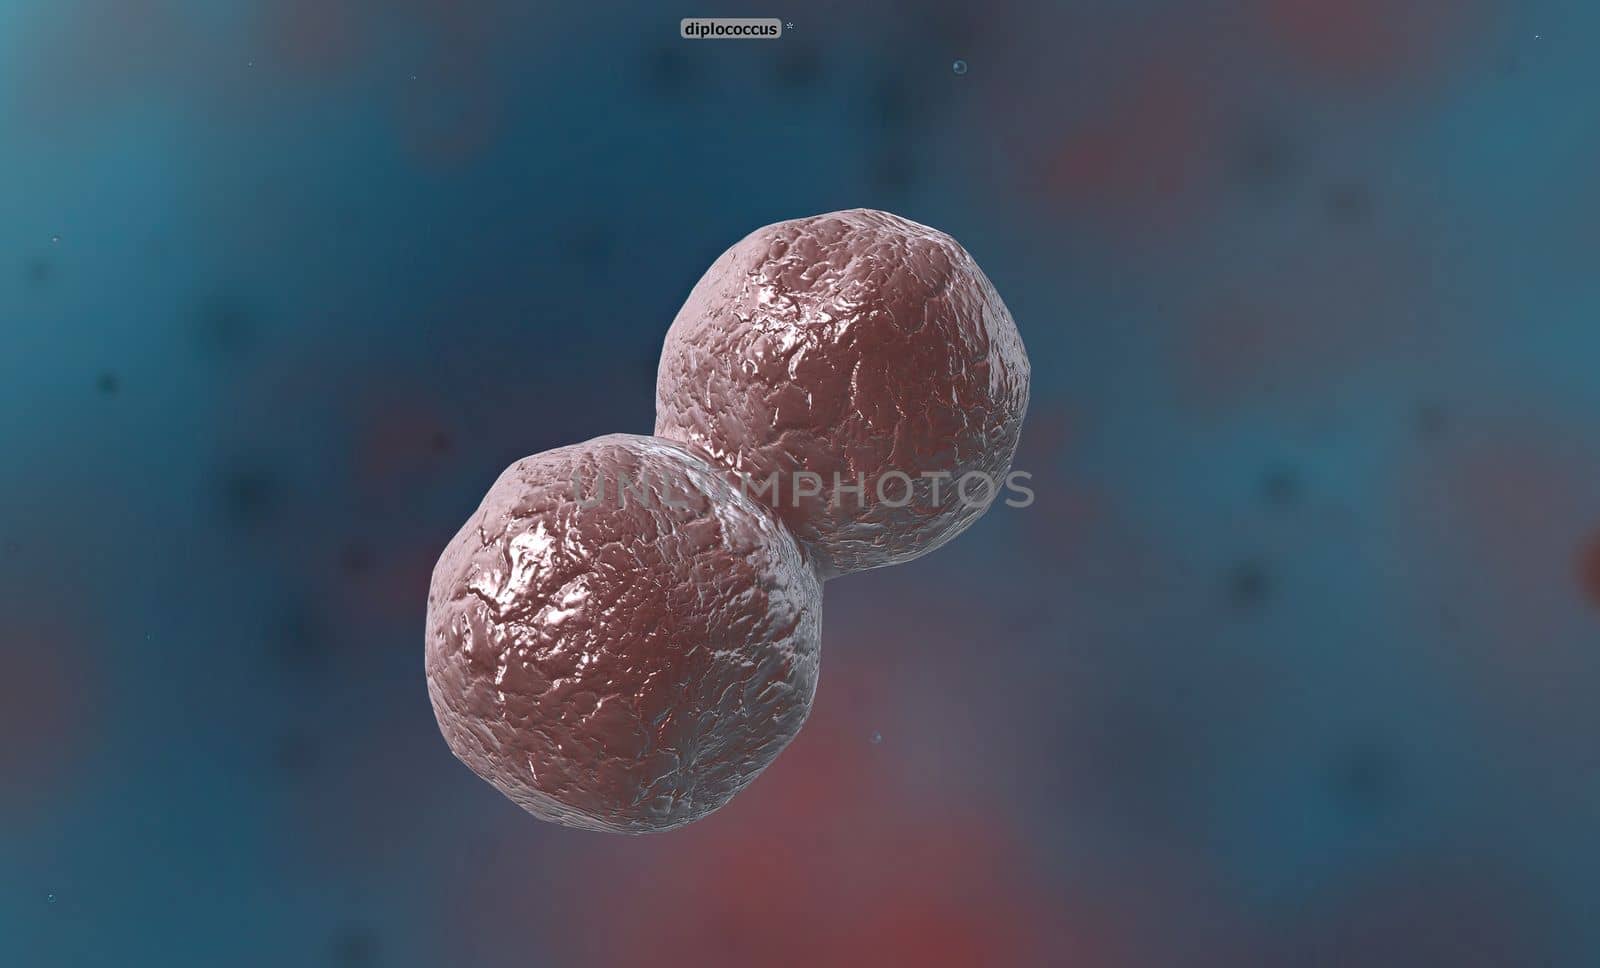 A cocci are any bacteria or archaeon that have a spherical, oval, or generally round shape. by creativepic